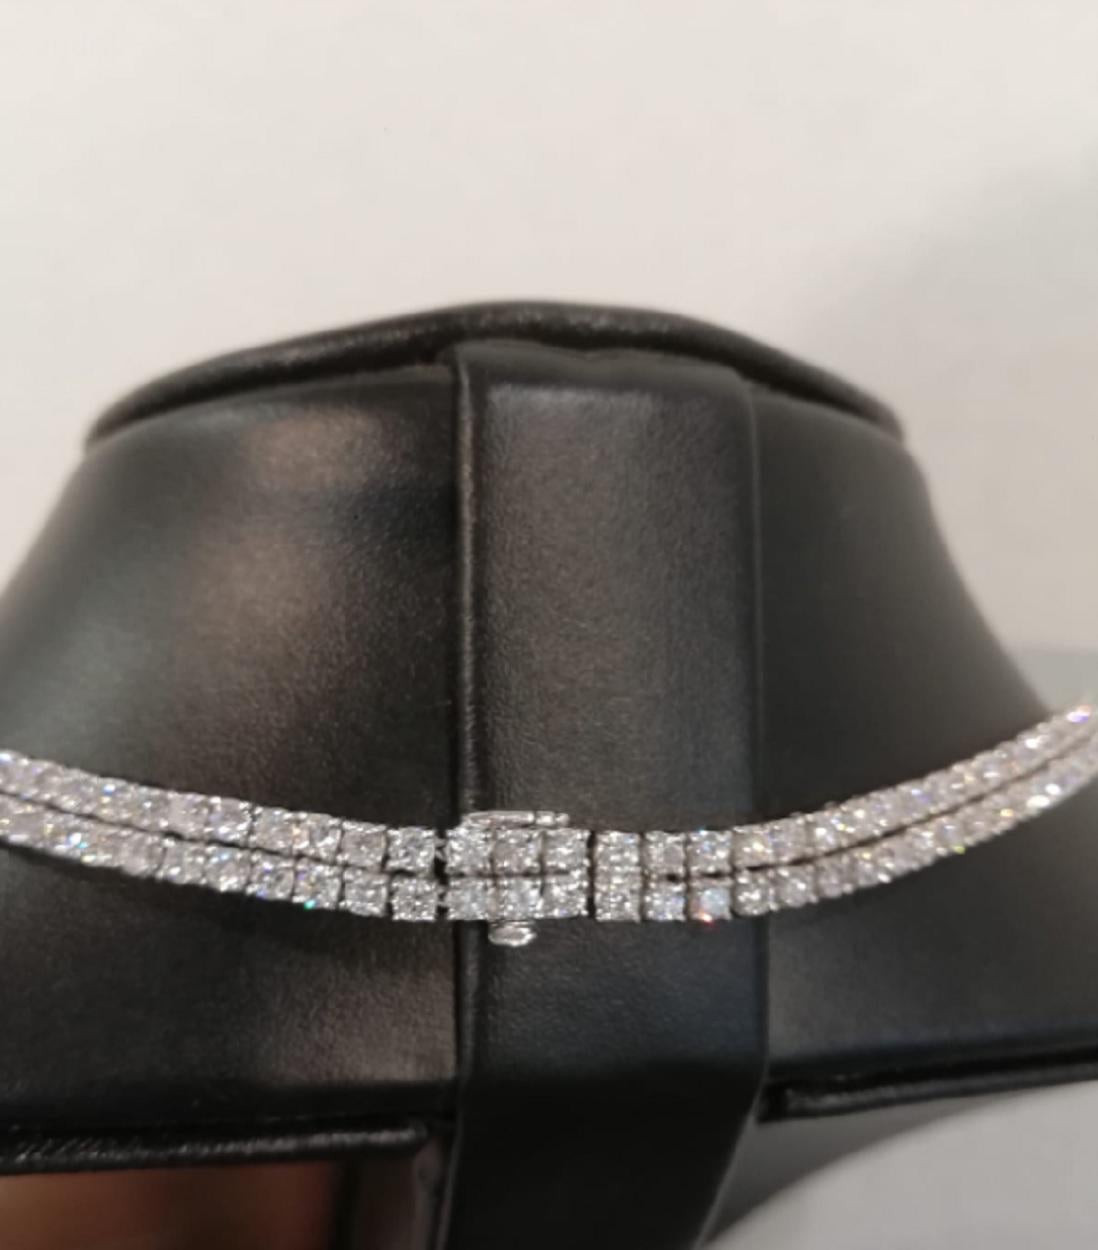 Heirloom necklace! the best Christmas present for a lady
38 carats double tennis necklace with a very nice and modern designed brooch with baguette diamonds.
All diamonds are VS/VVS clarity color is F/G
natural untreated diamonds excellent